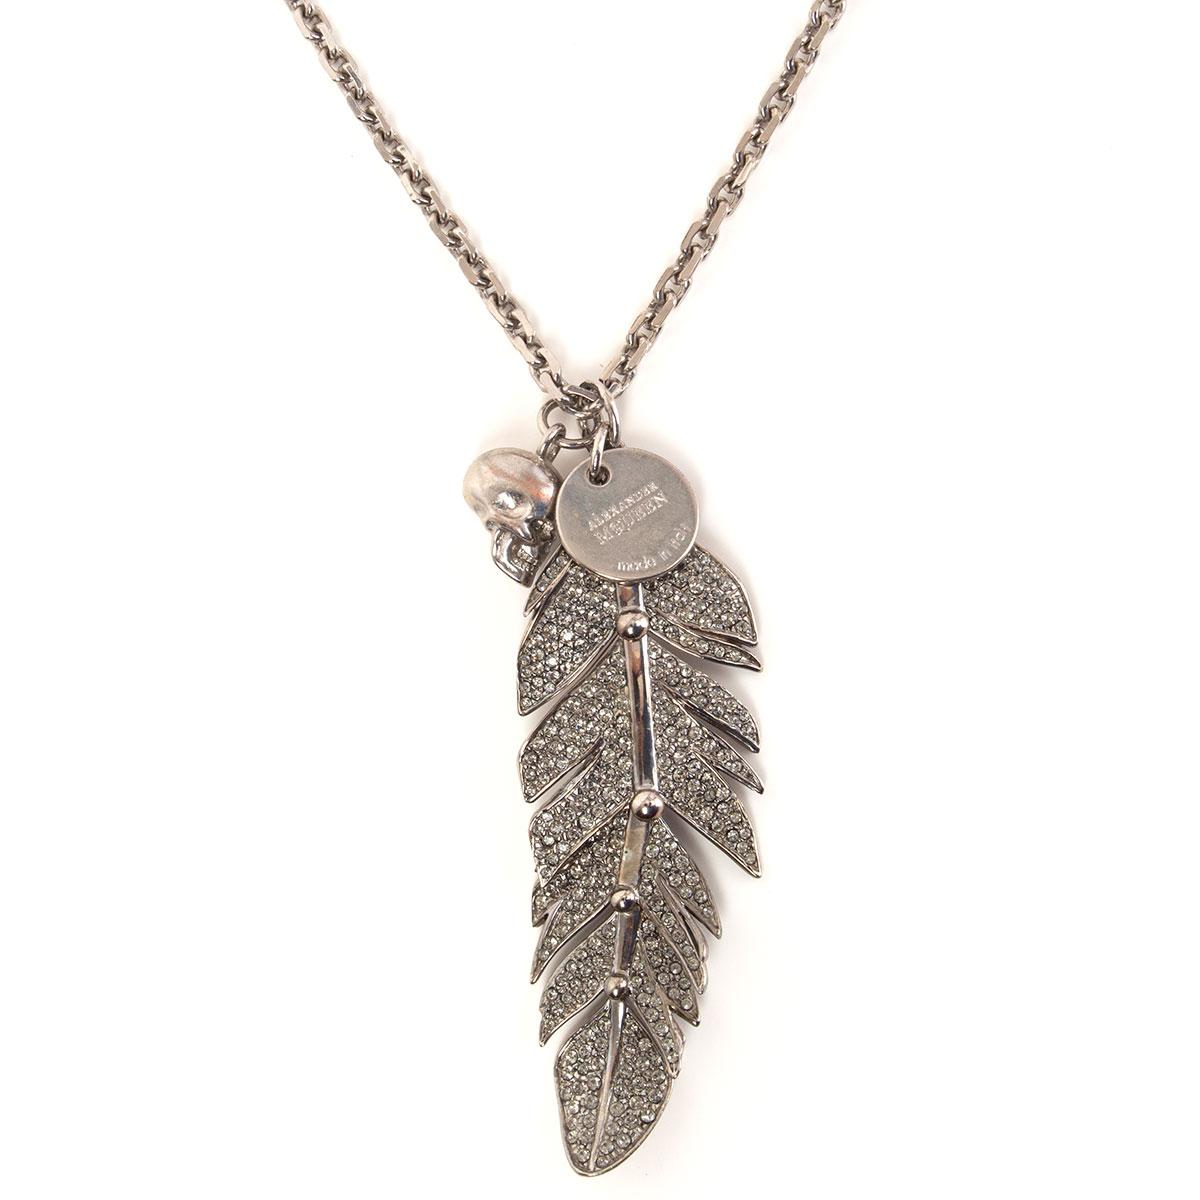 Alexander McQueen chain necklace in silver-tone brass with rhinestone encrusted feather pendant. Has been worn and is in excellent condition.

Width 3.5cm (1.4in)
Height 10cm (3.9in)
Length 51cm (19.9in)
